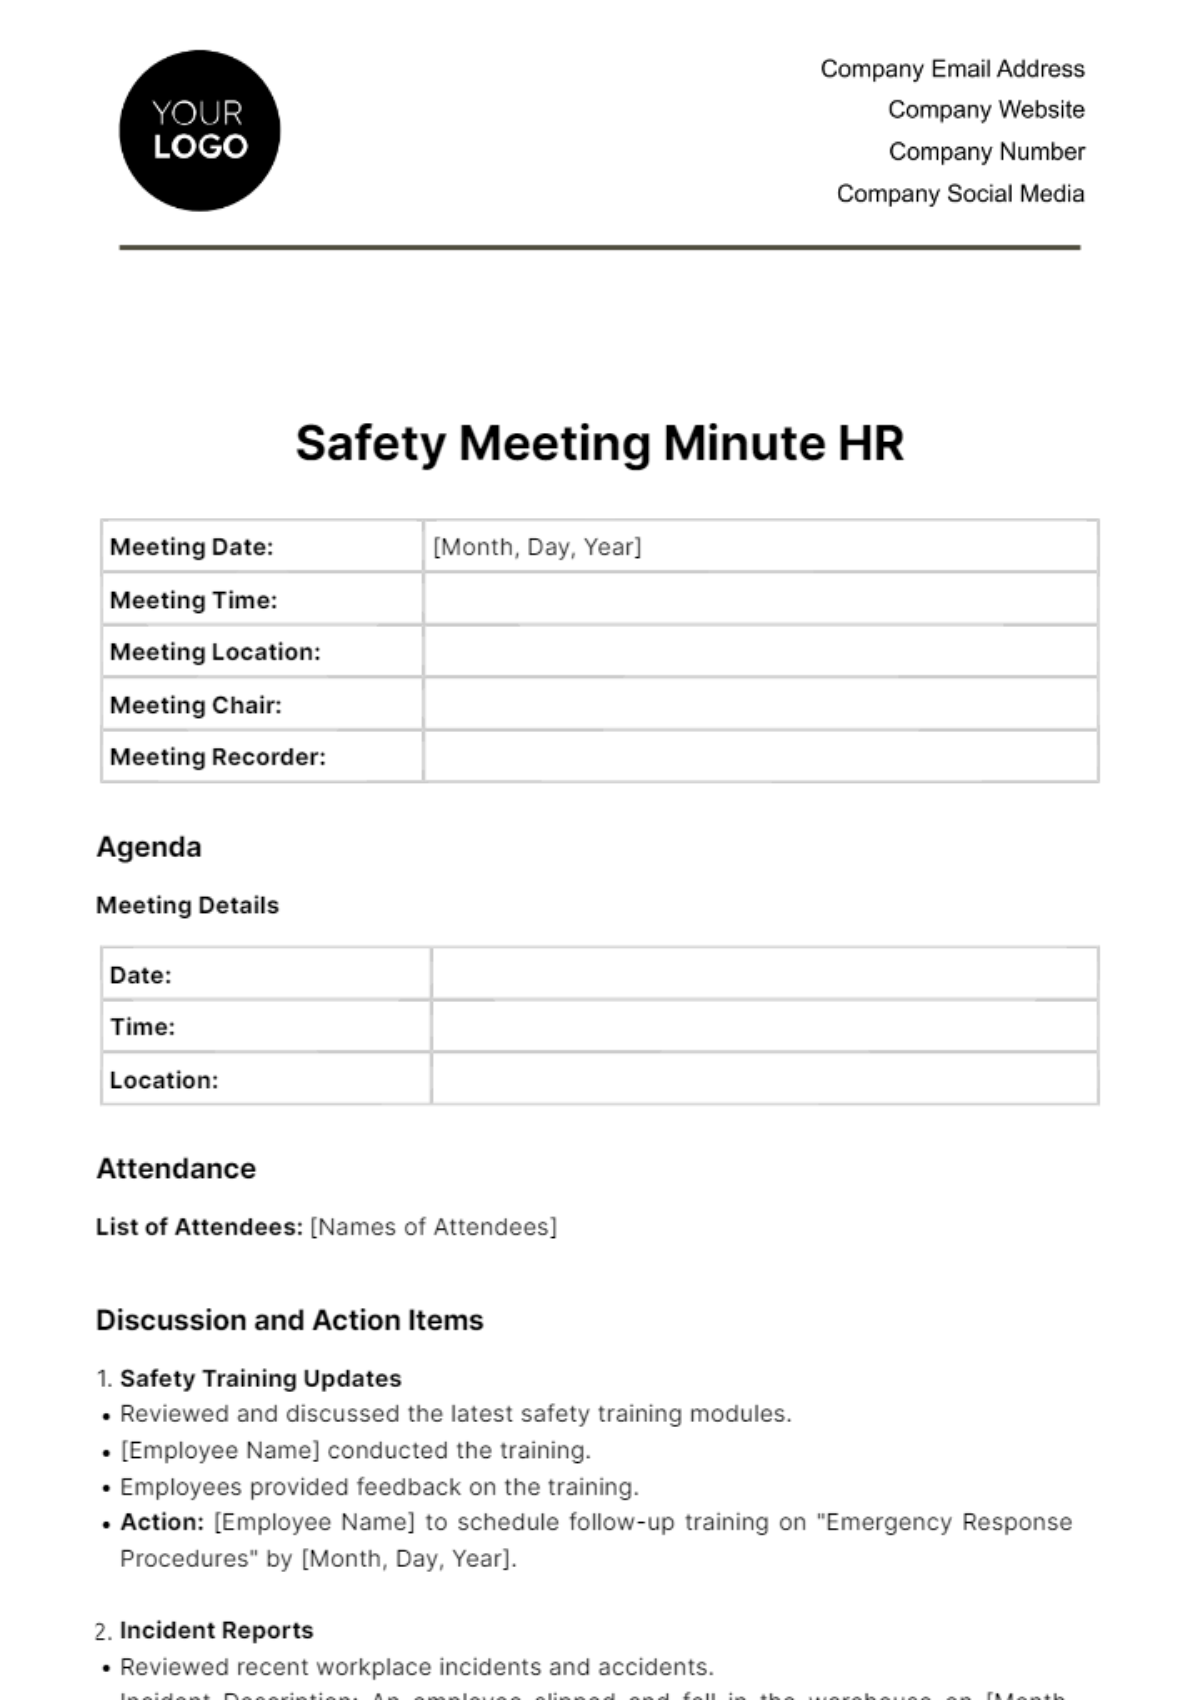 Safety Meeting Minute HR Template